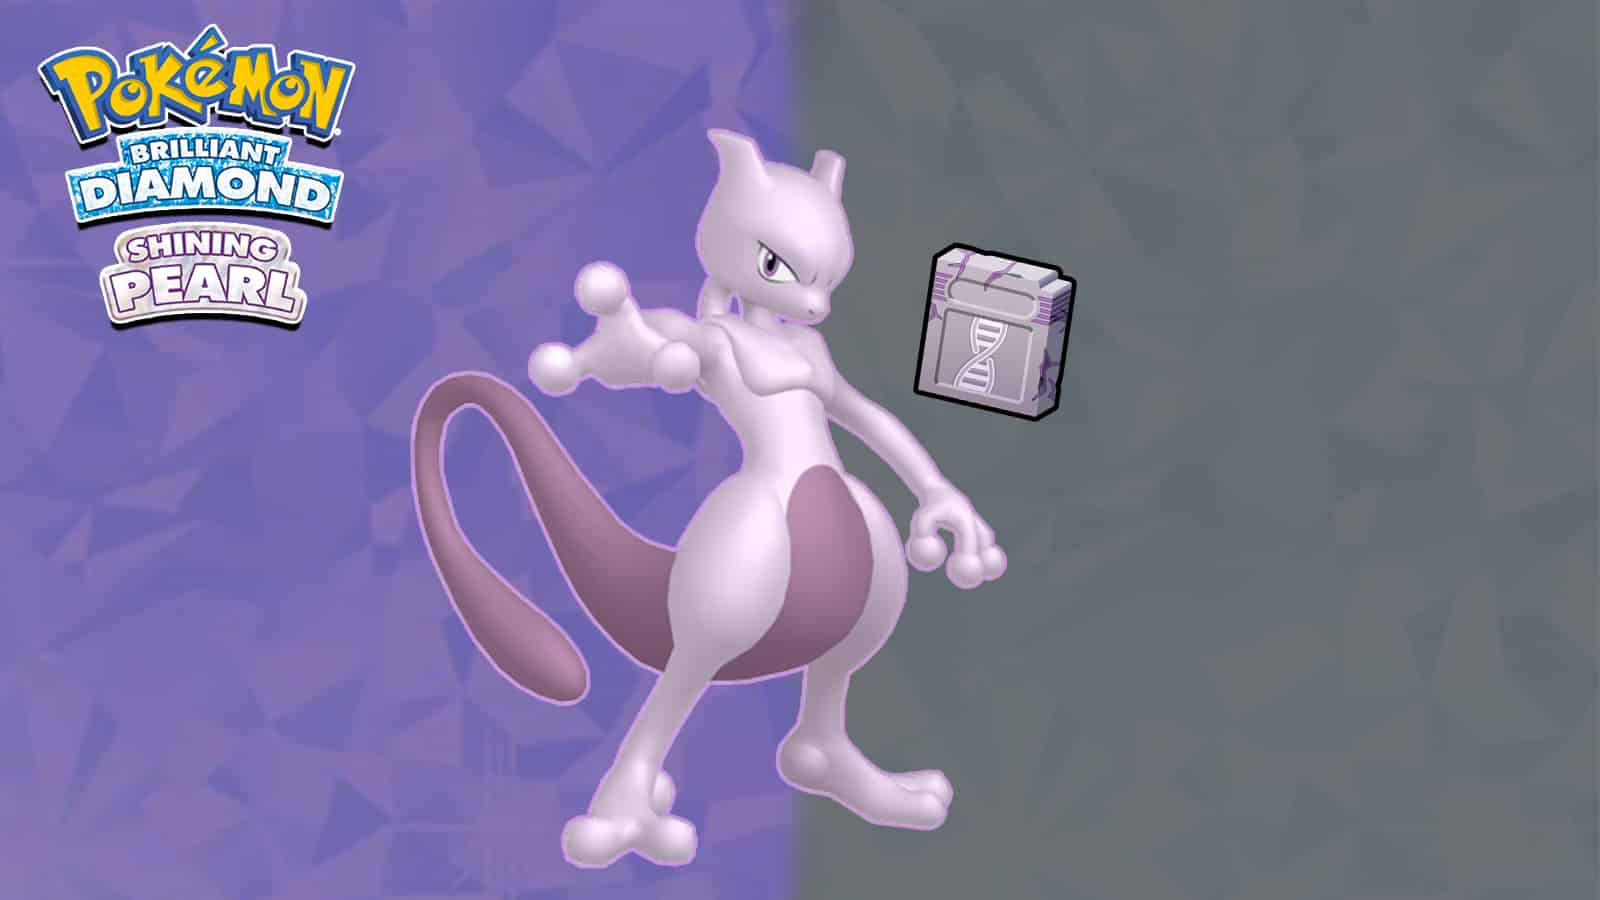 How to get Mewtwo in Pokemon GO in December 2022